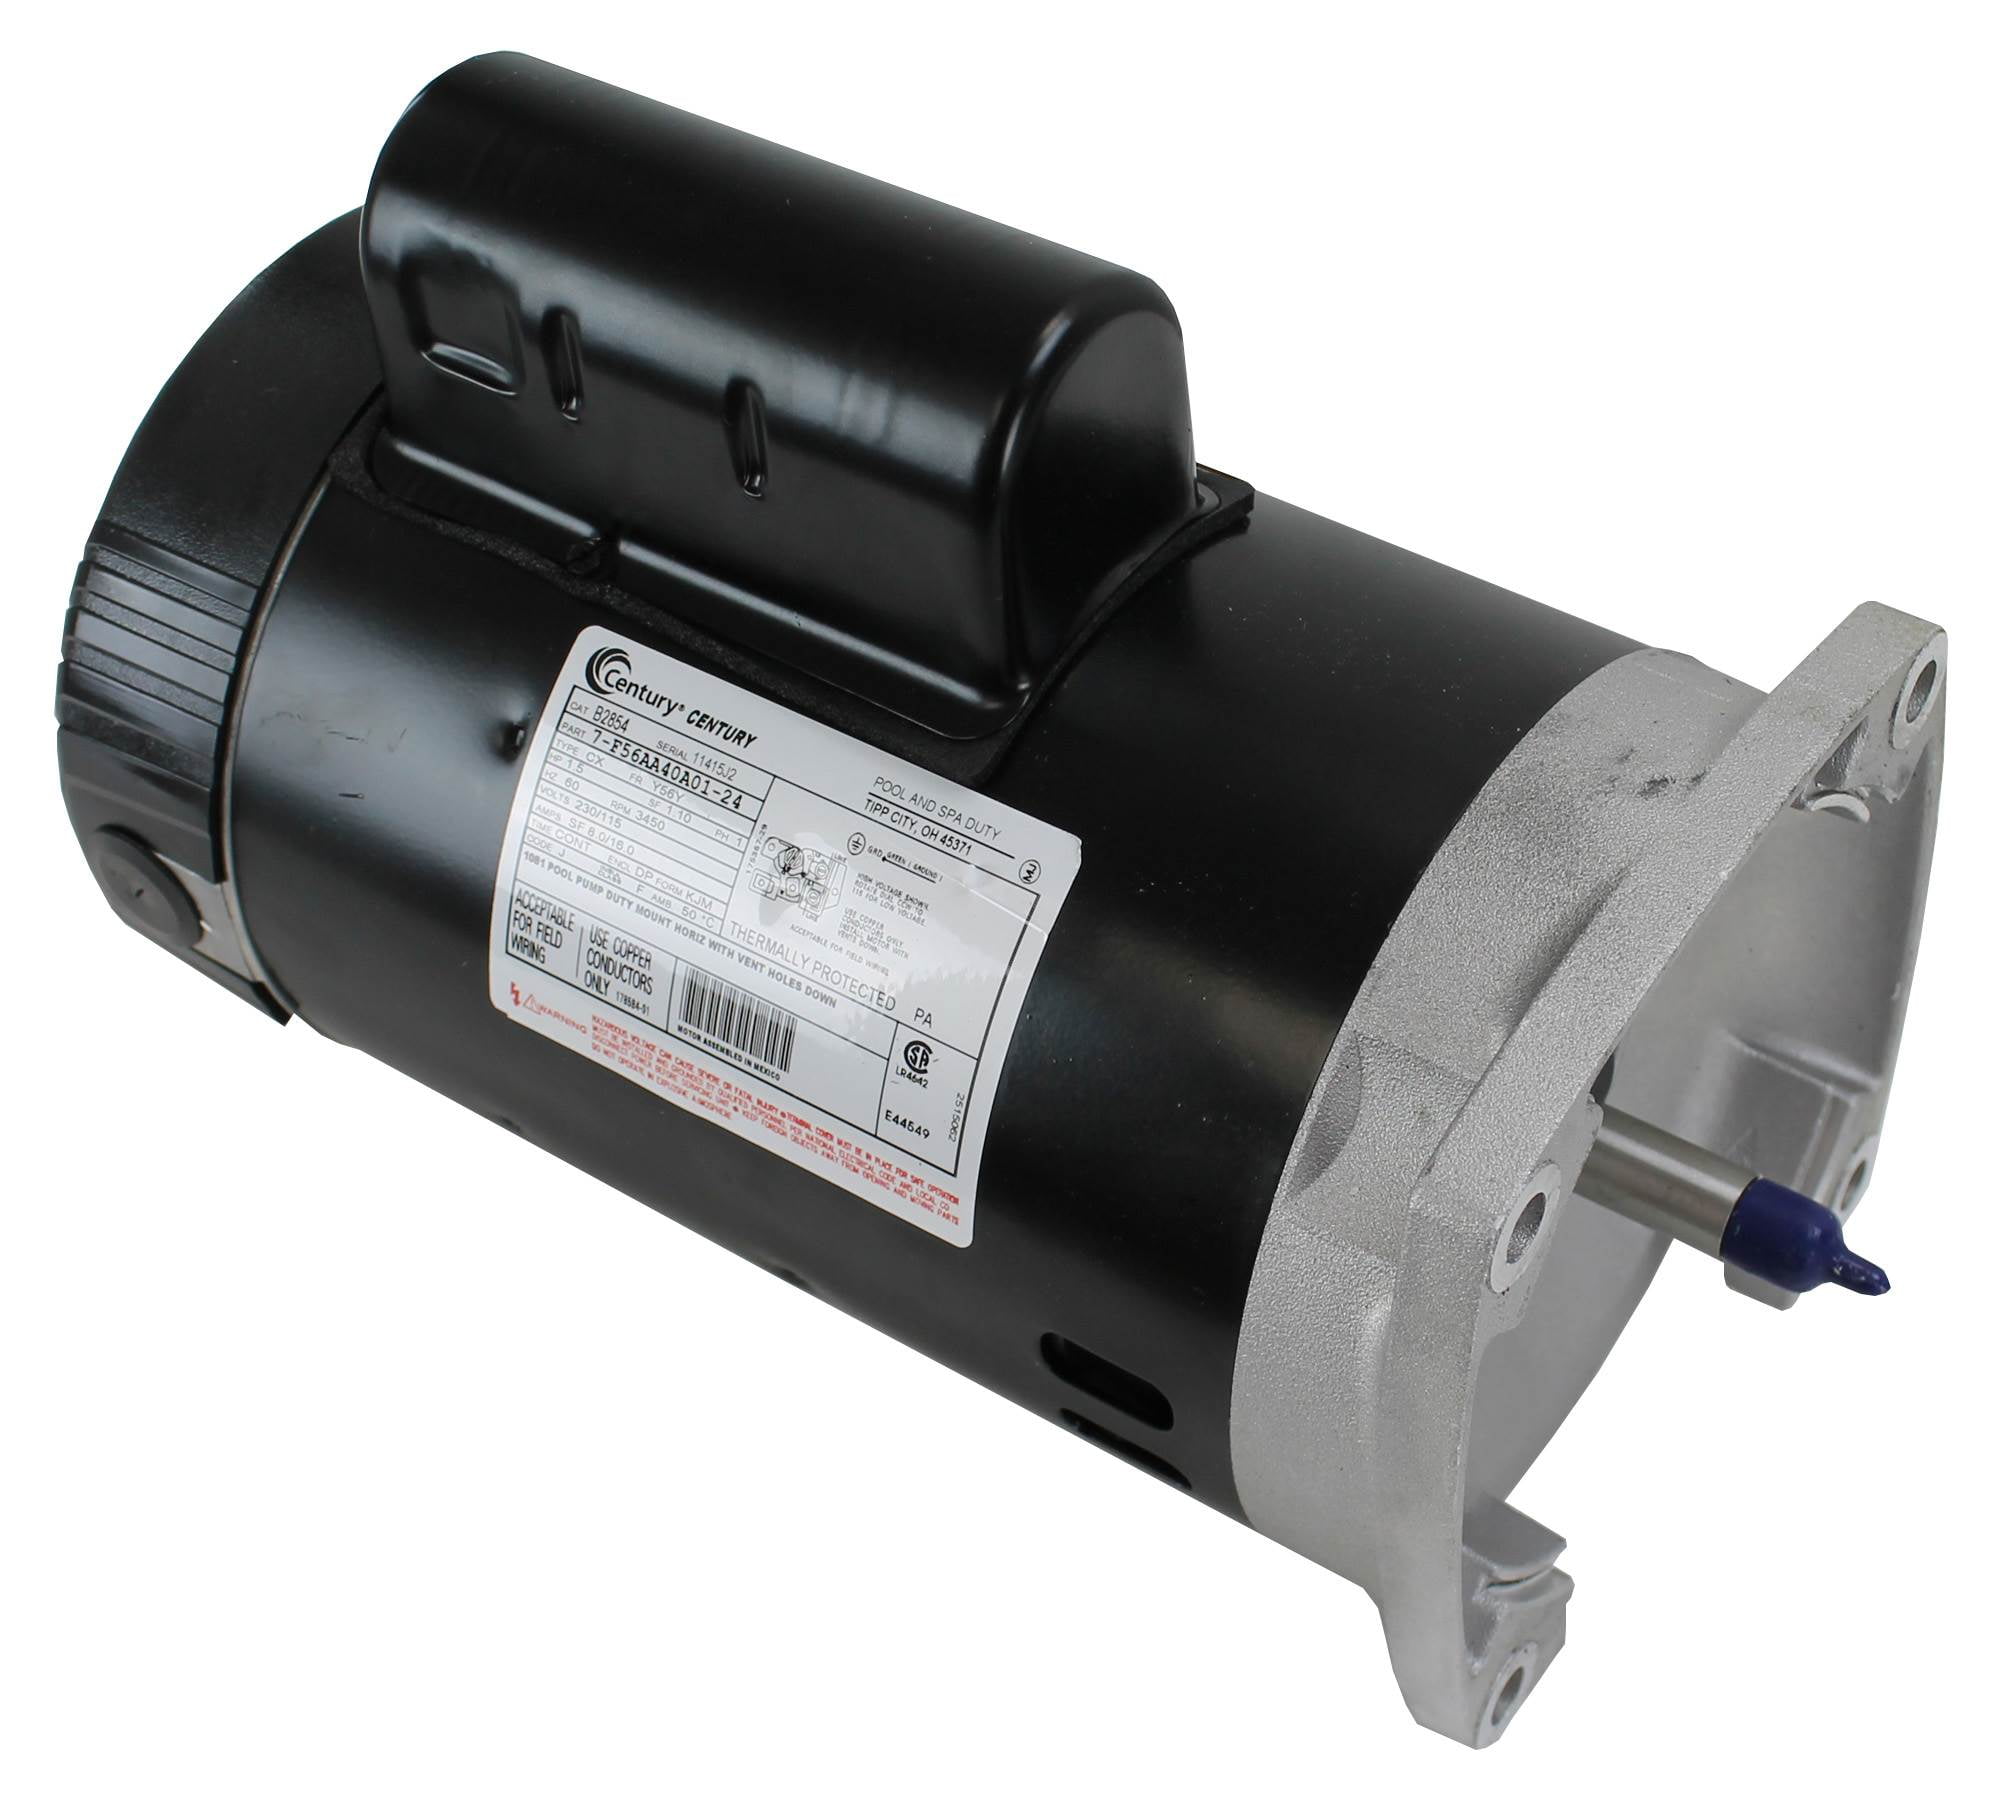 Smith Century B2854 Up-Rate 1.5HP Square Flange Pool/Spa Replacement  Motor